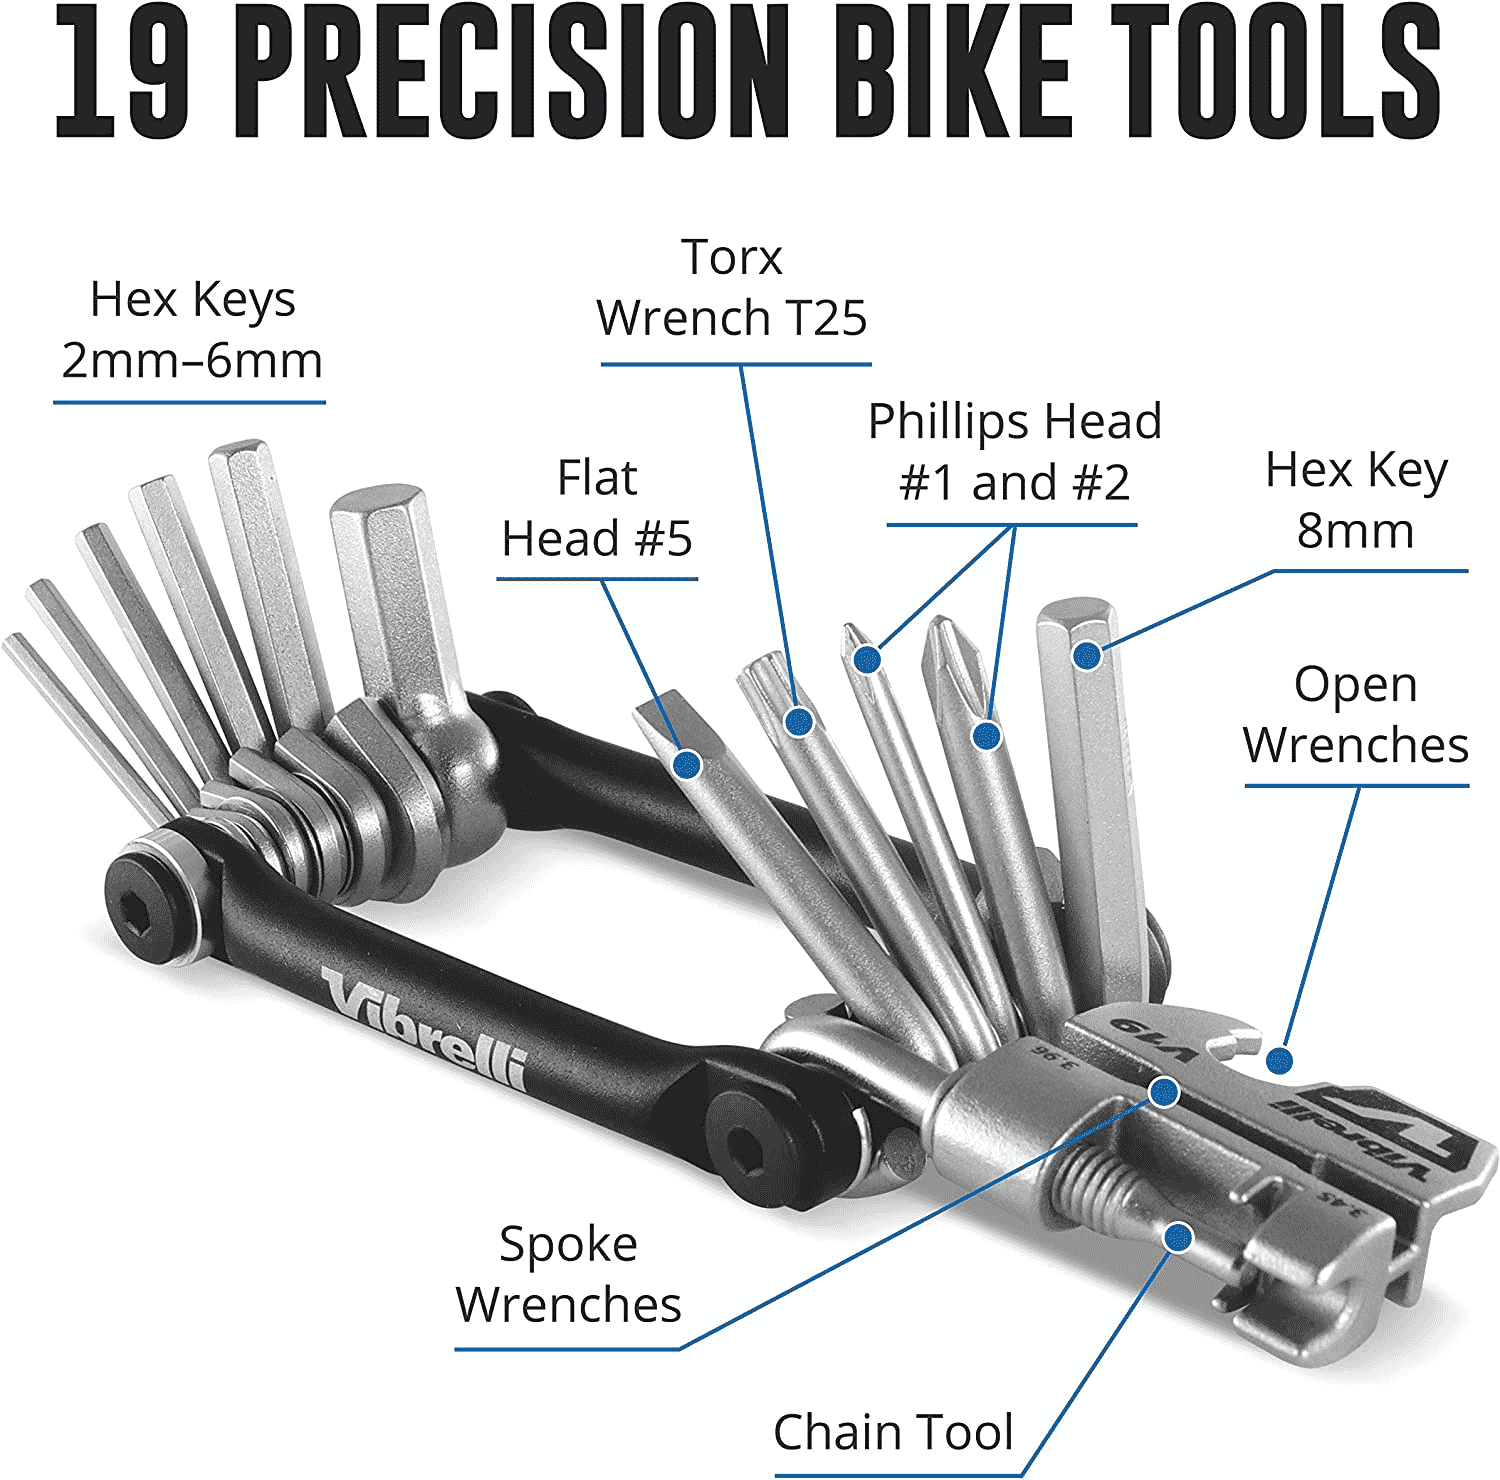 A multi-tool like this has all the tools you will need to fasten and loosen screws on your mountain bike.